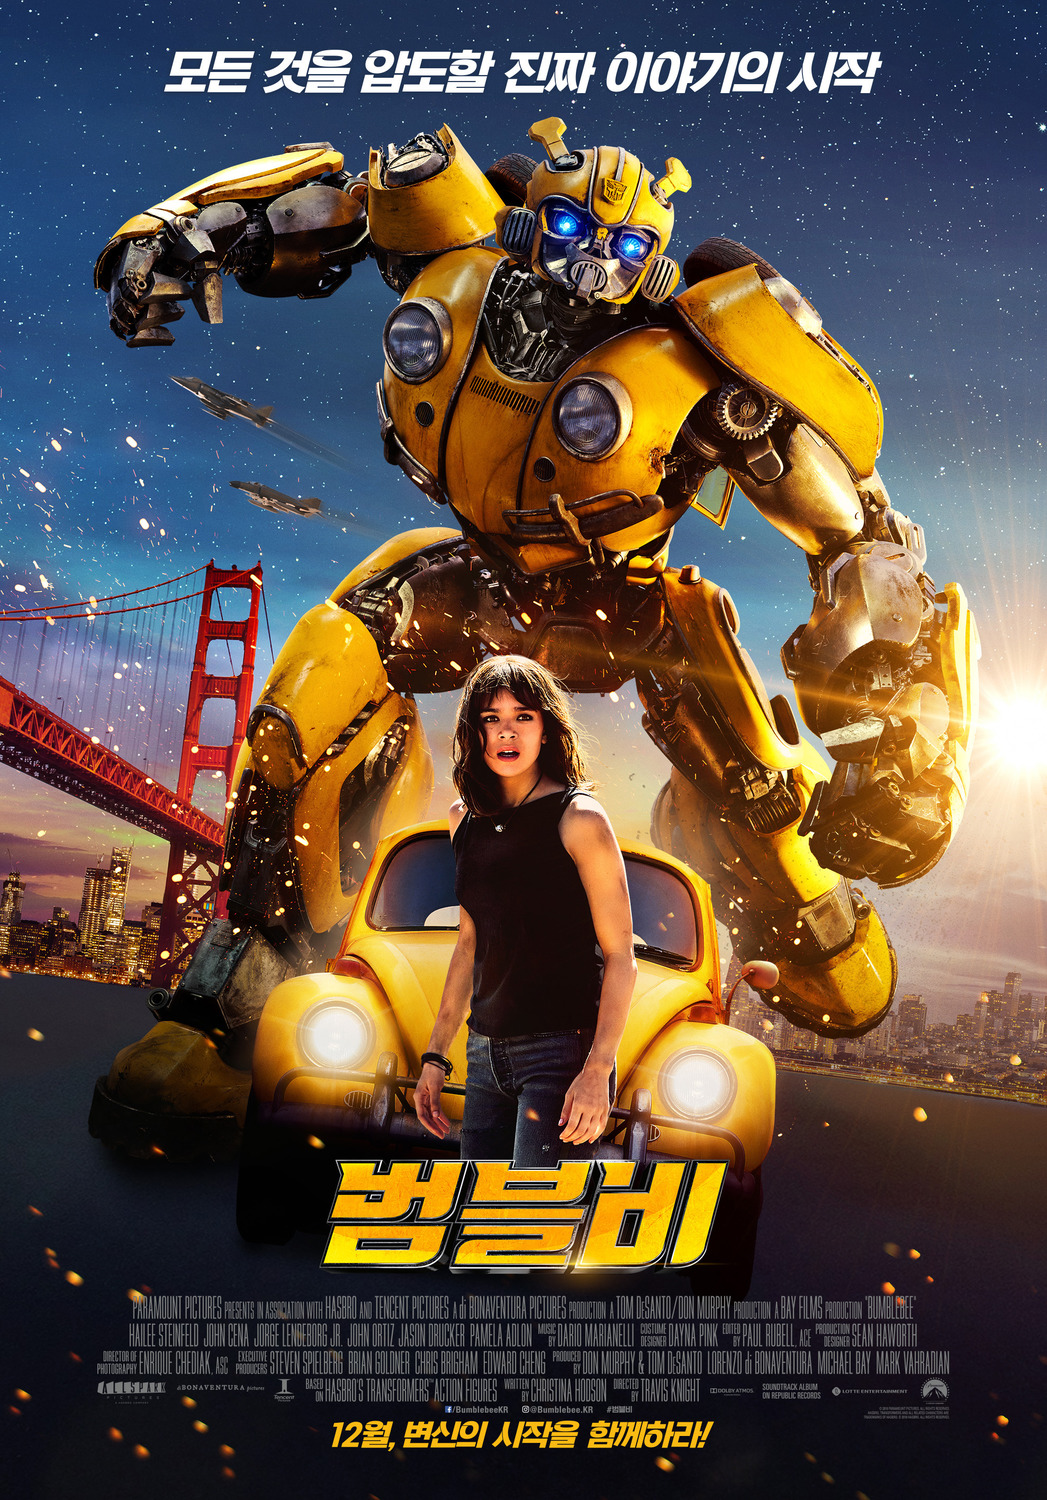 Extra Large Movie Poster Image for Bumblebee (#9 of 21)